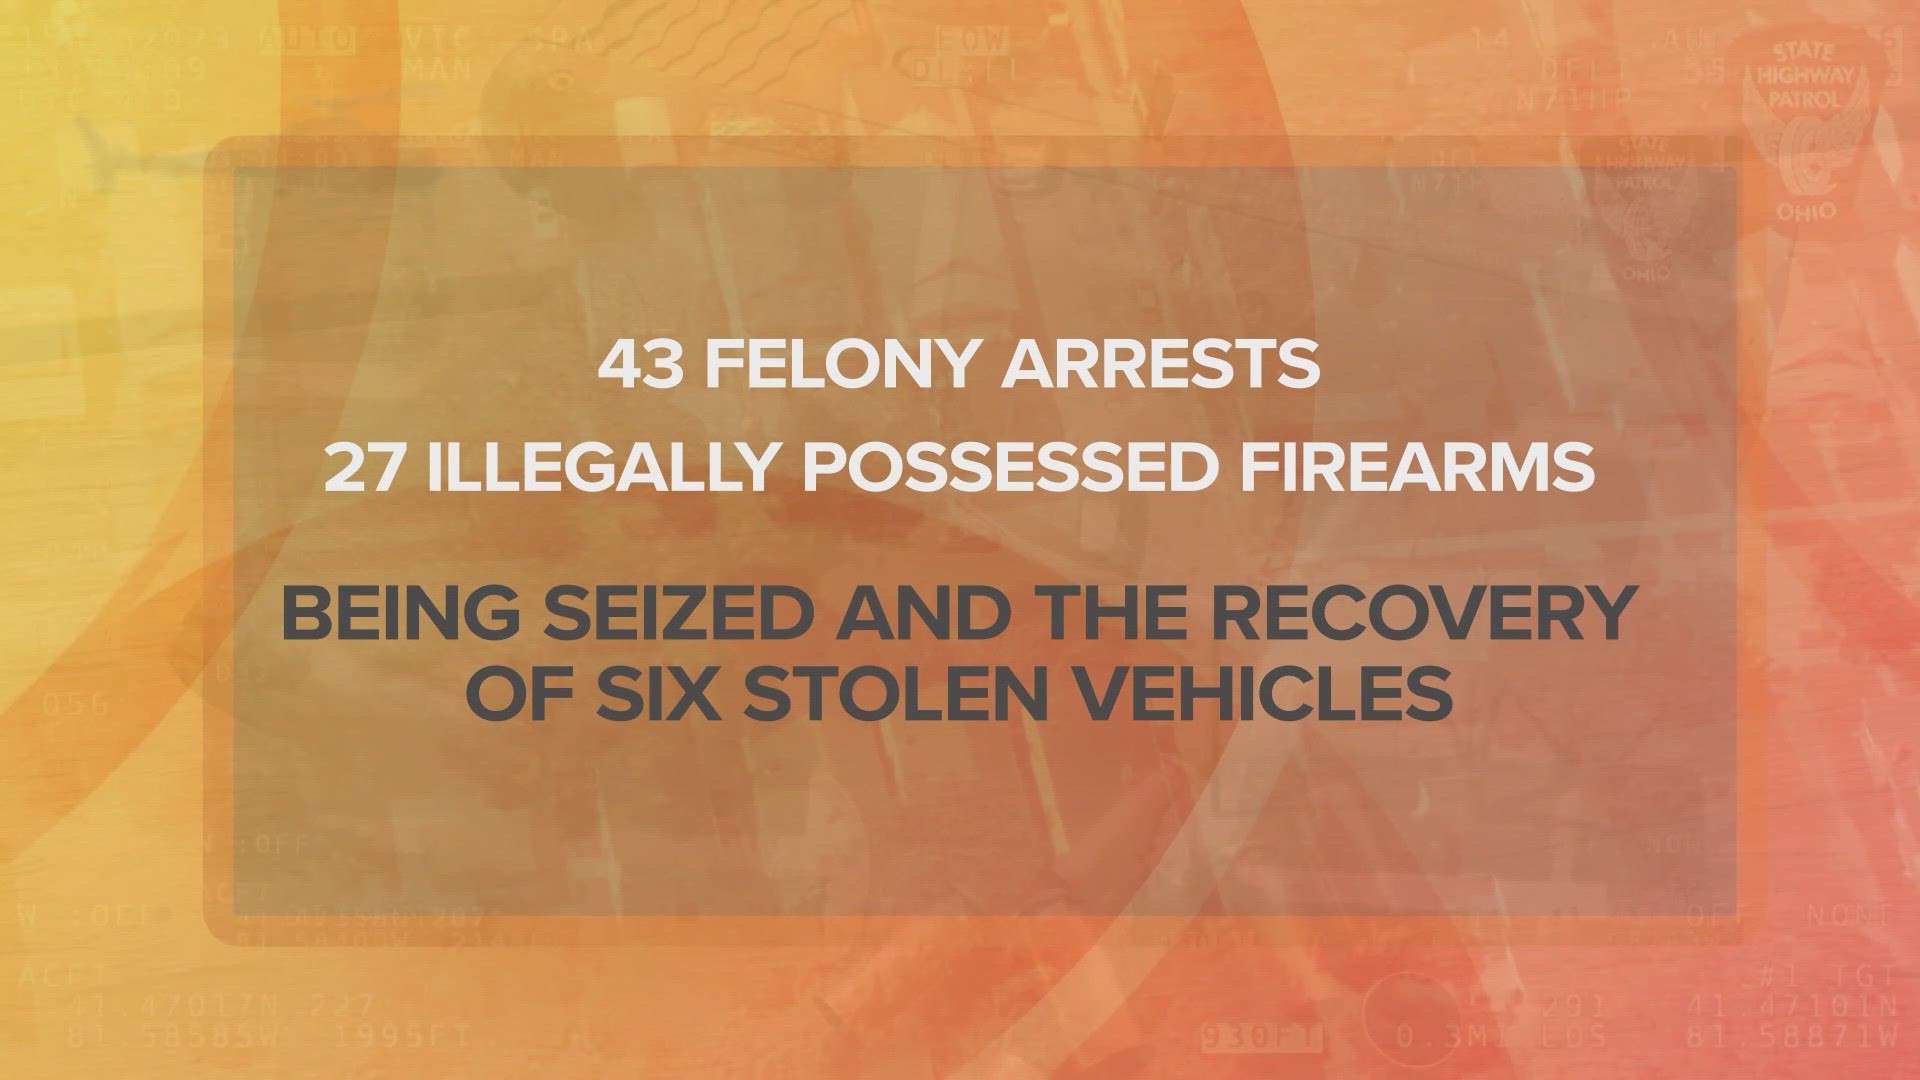 In addition, the fourth surge operation resulted in 27 illegally possessed firearms being seized and the recovery of six stolen vehicles.